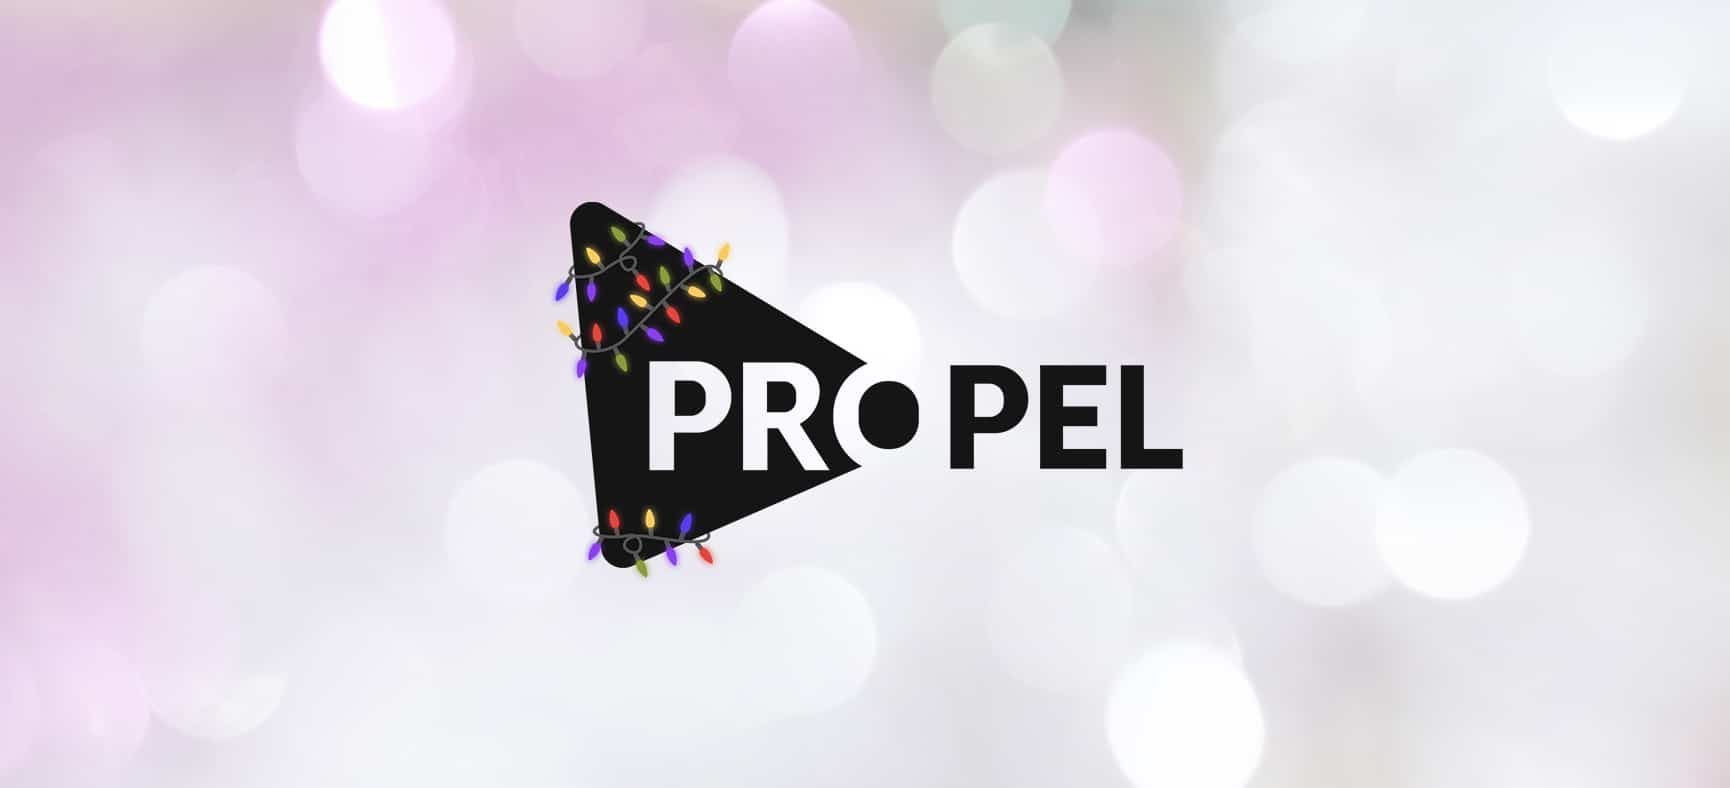 The Propel logo surrounded by holiday lights